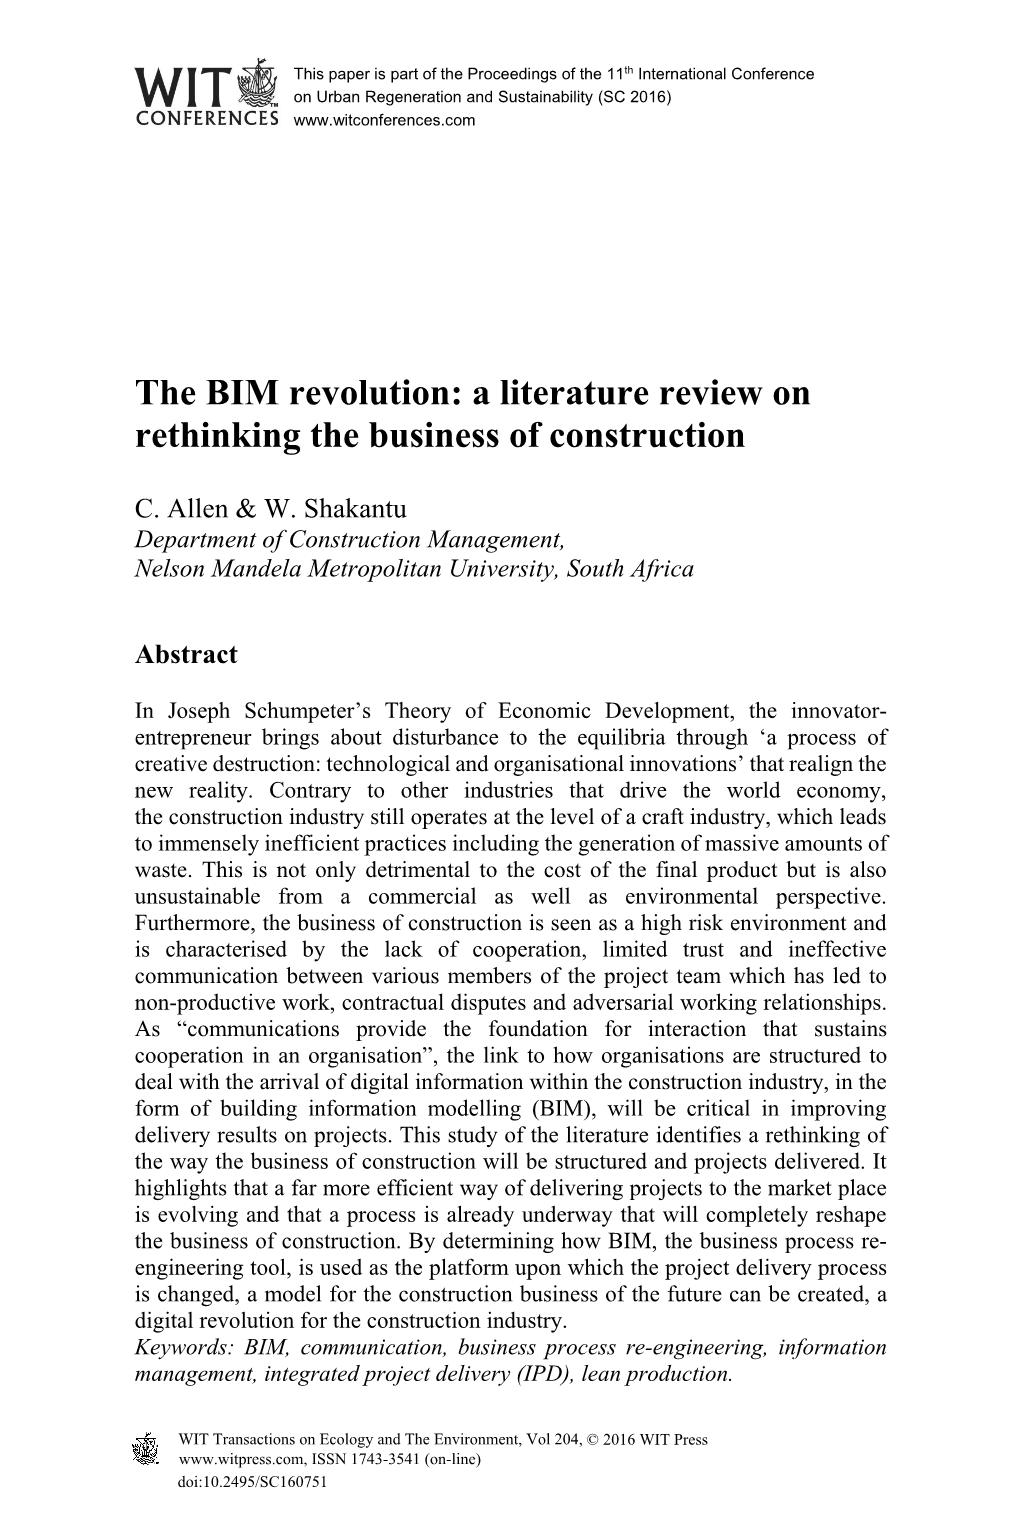 The BIM Revolution: a Literature Review on Rethinking the Business of Construction